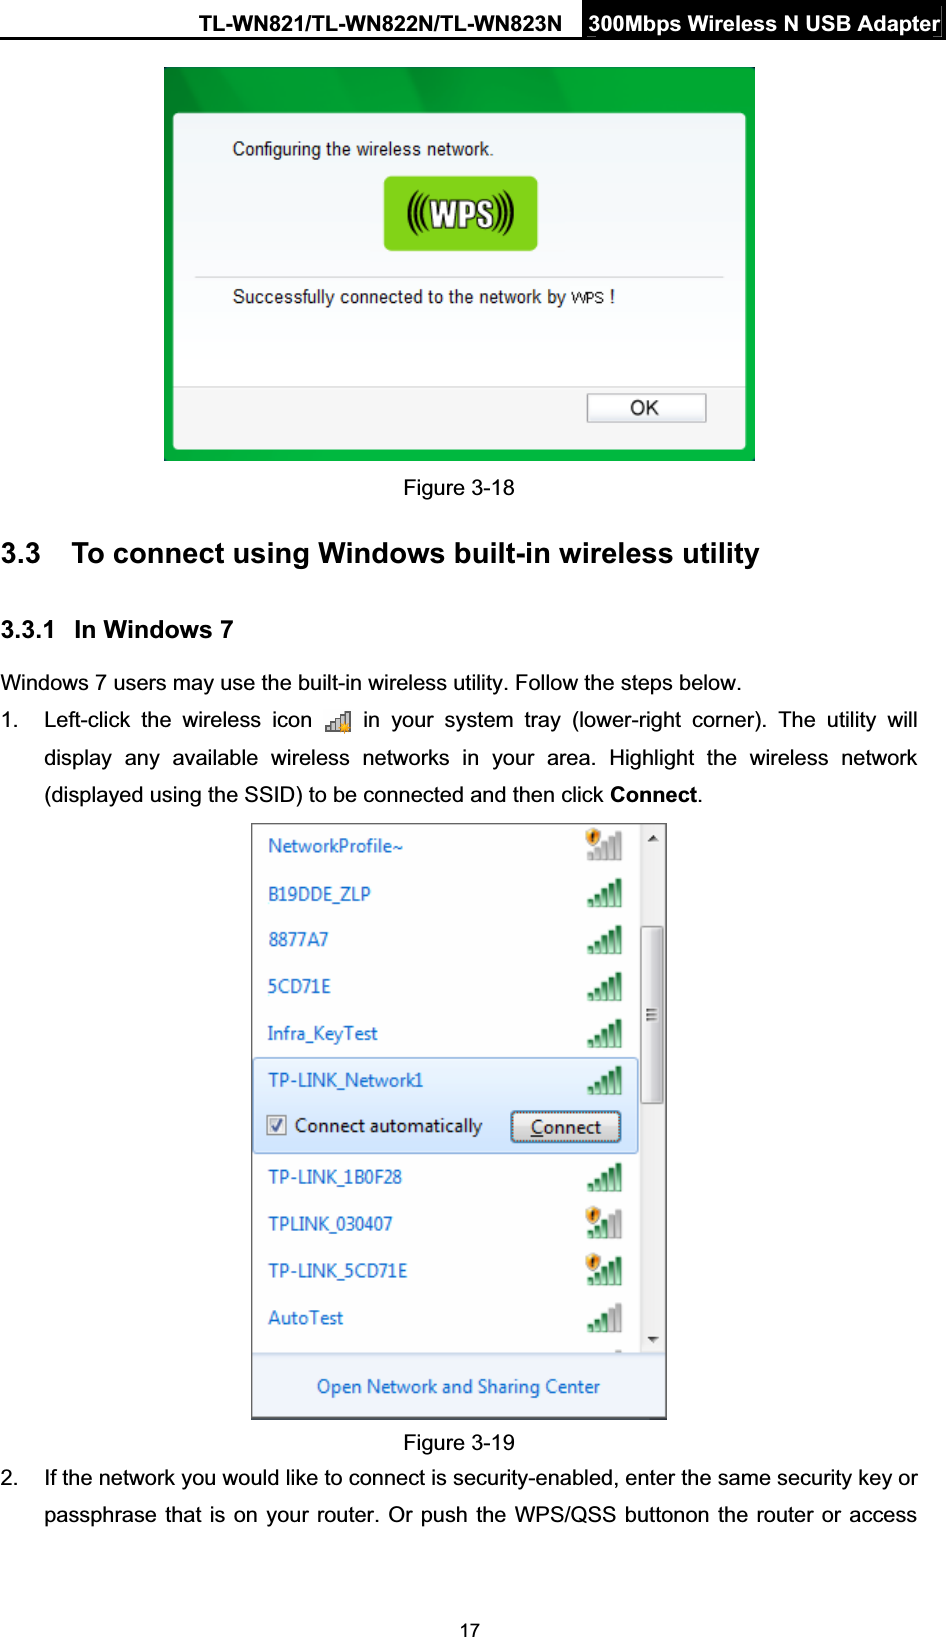 TL-WN821/TL-WN822N/TL-WN823N  300Mbps Wireless N USB Adapter17Figure 3-18 3.3 To connect using Windows built-in wireless utility 3.3.1 In Windows 7 Windows 7 users may use the built-in wireless utility. Follow the steps below. 1.  Left-click the wireless icon   in your system tray (lower-right corner). The utility will display any available wireless networks in your area. Highlight the wireless network (displayed using the SSID) to be connected and then click Connect.Figure 3-19 2.  If the network you would like to connect is security-enabled, enter the same security key or passphrase that is on your router. Or push the WPS/QSS buttonon the router or access 